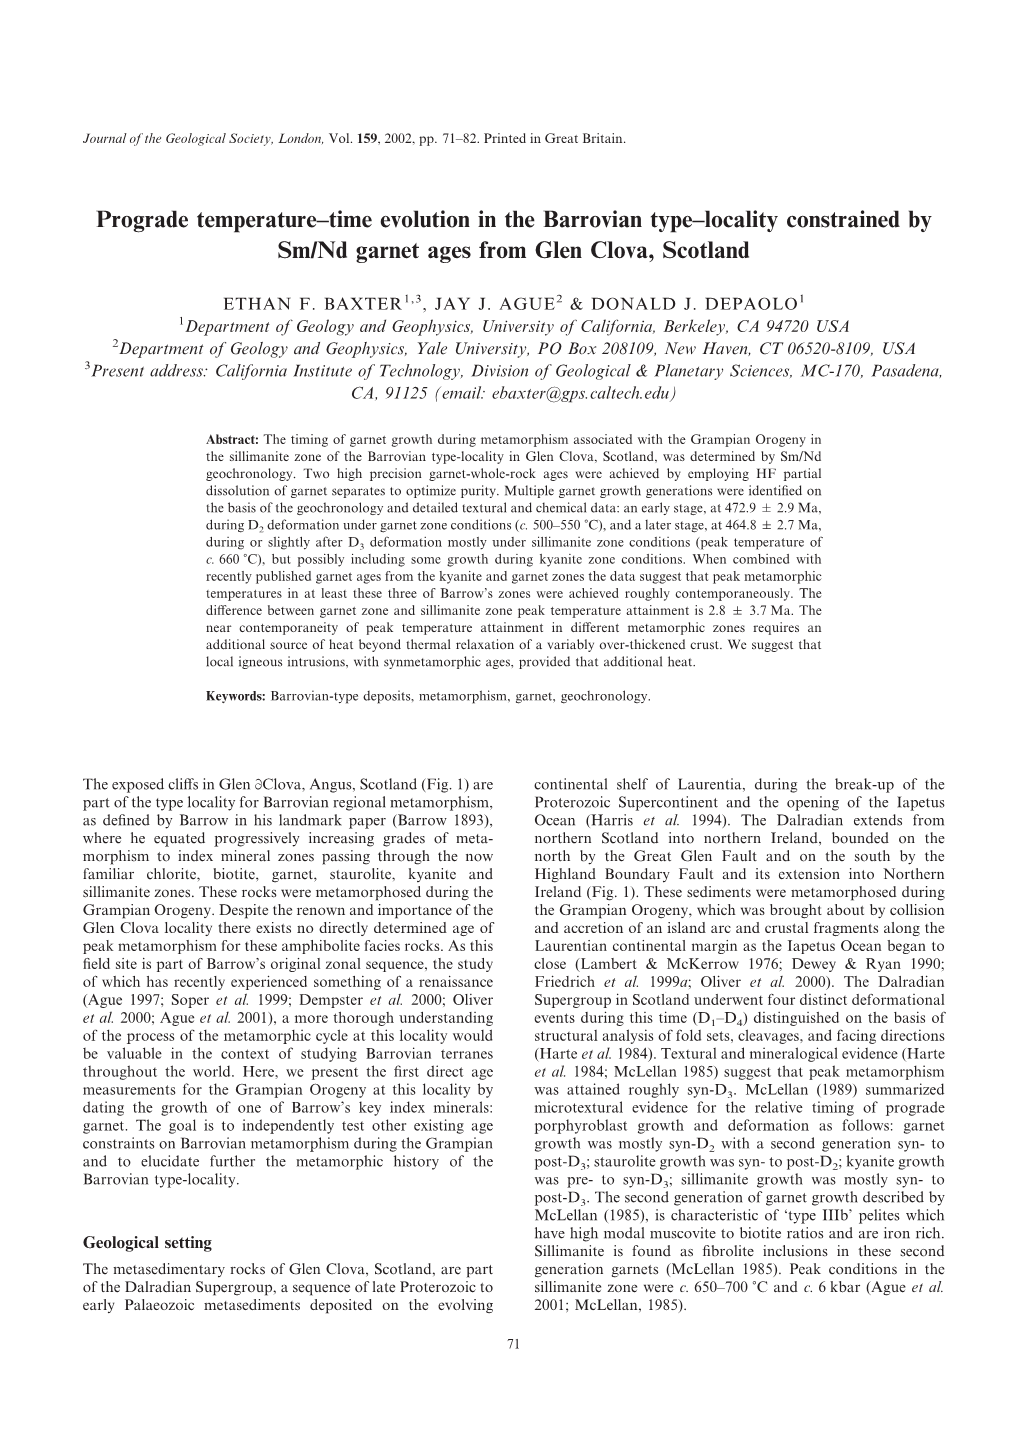 Prograde Temperature–Time Evolution in the Barrovian Type–Locality Constrained by Sm/Nd Garnet Ages from Glen Clova, Scotland